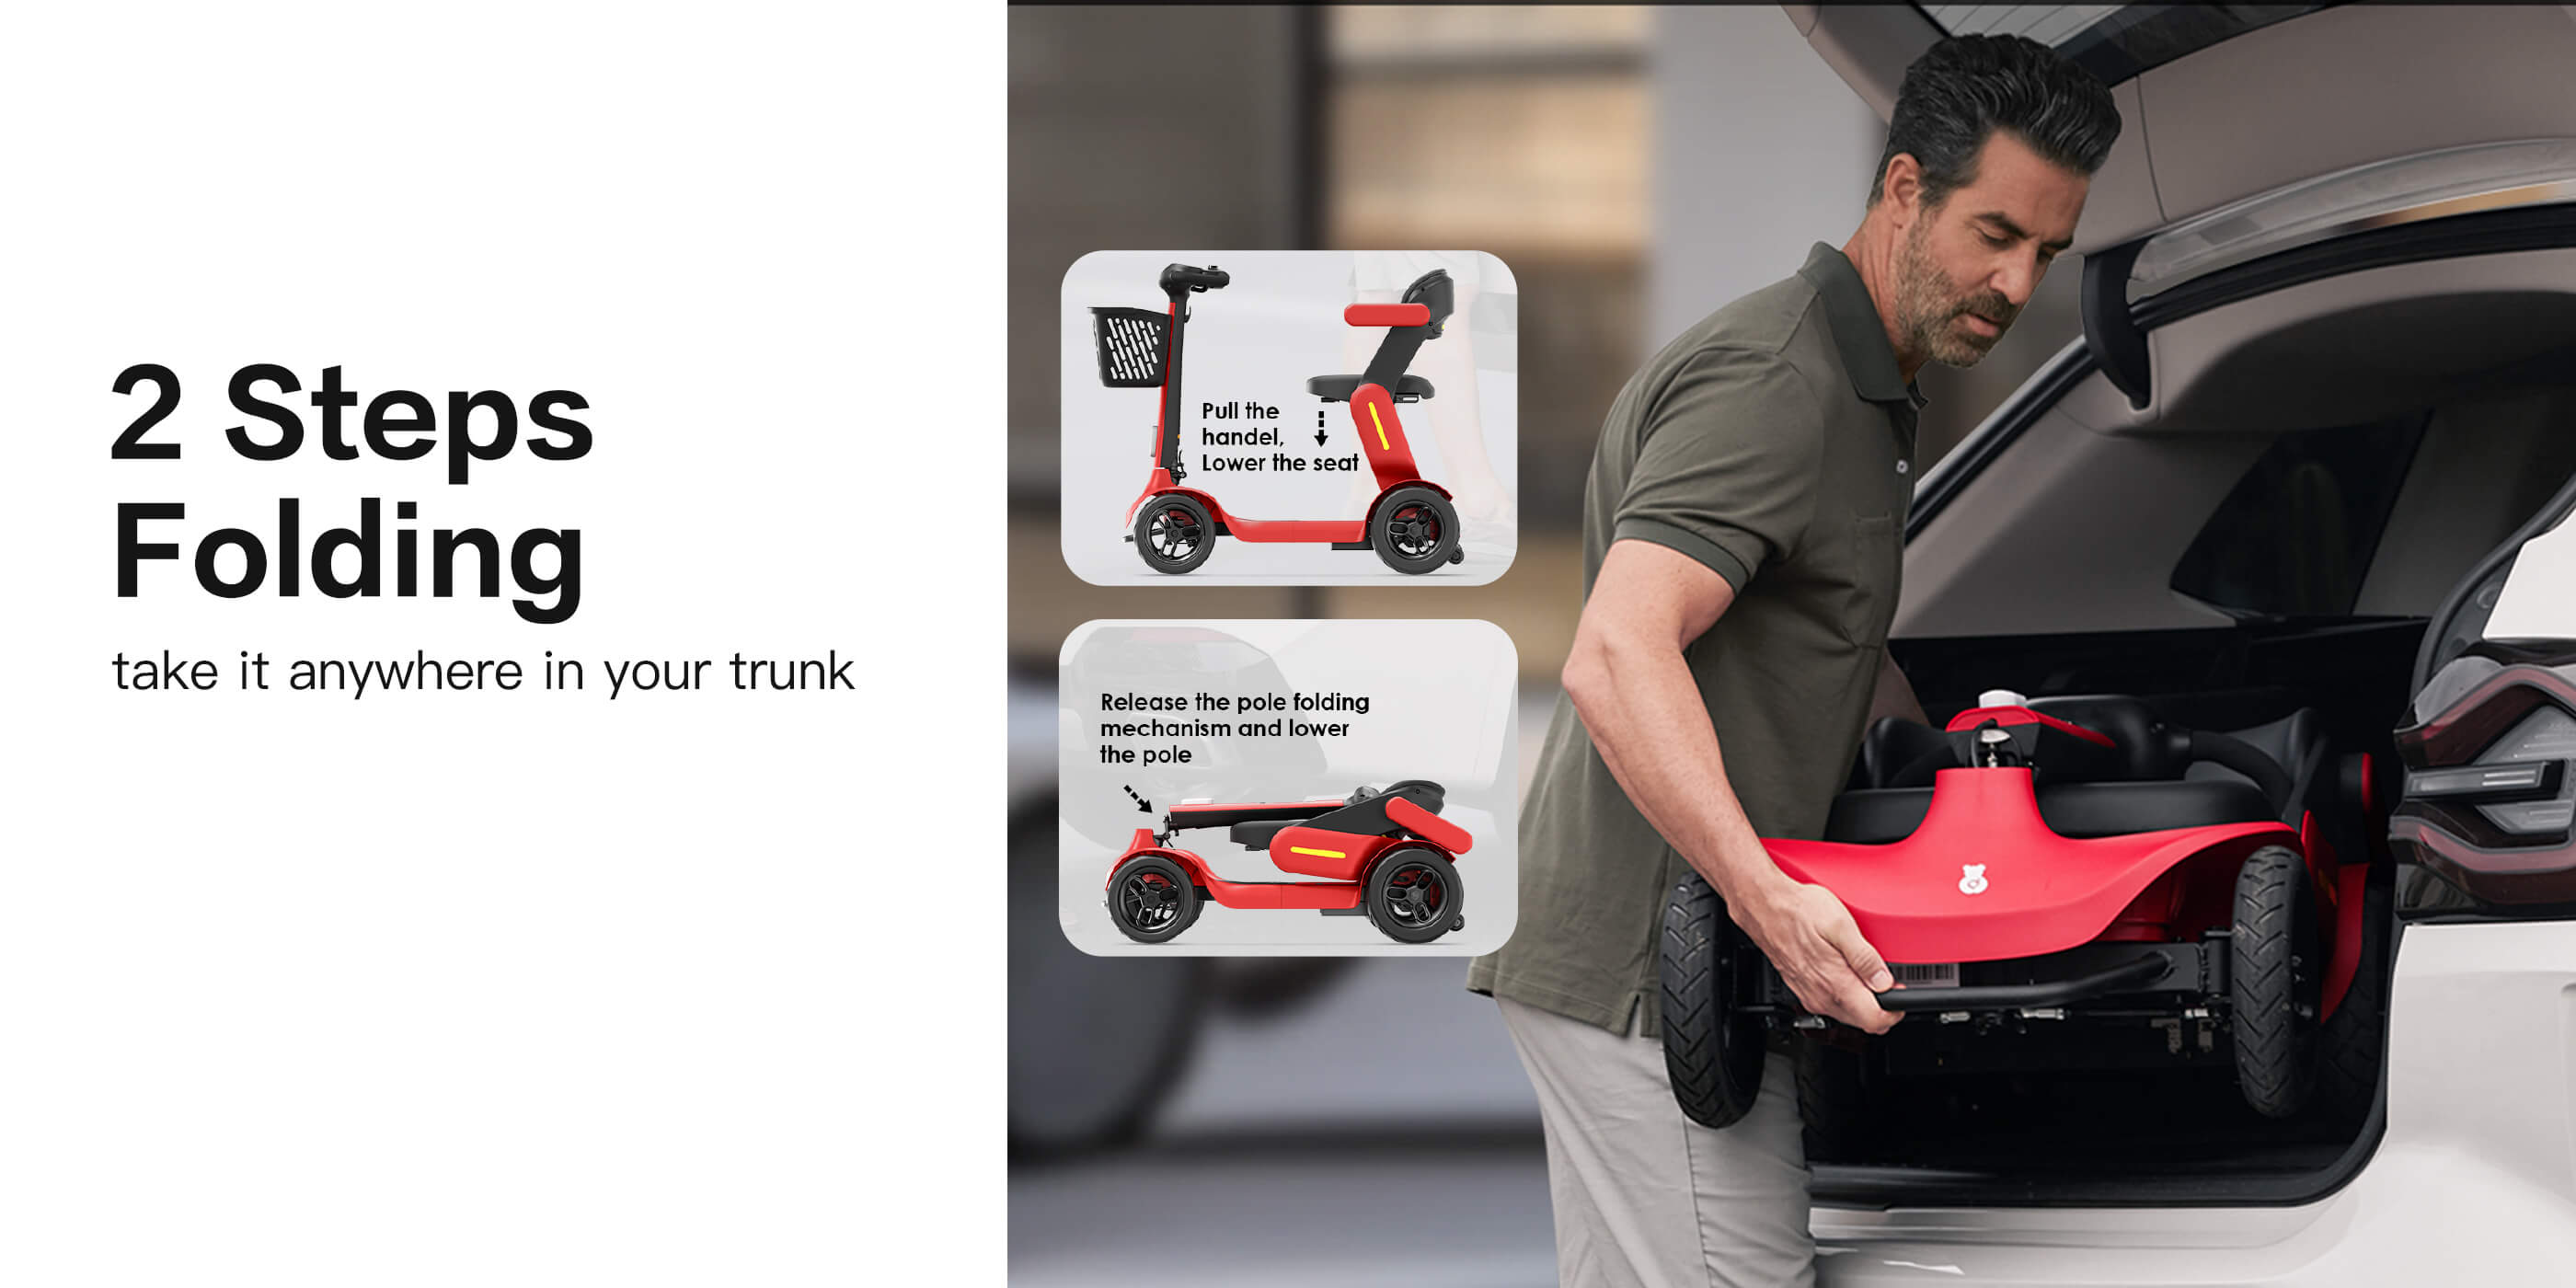 Glashow Mobility Scooter | Elevate Your Mobiity| S3 Model - A revolutional mobility scooter has arrived-2steps folding